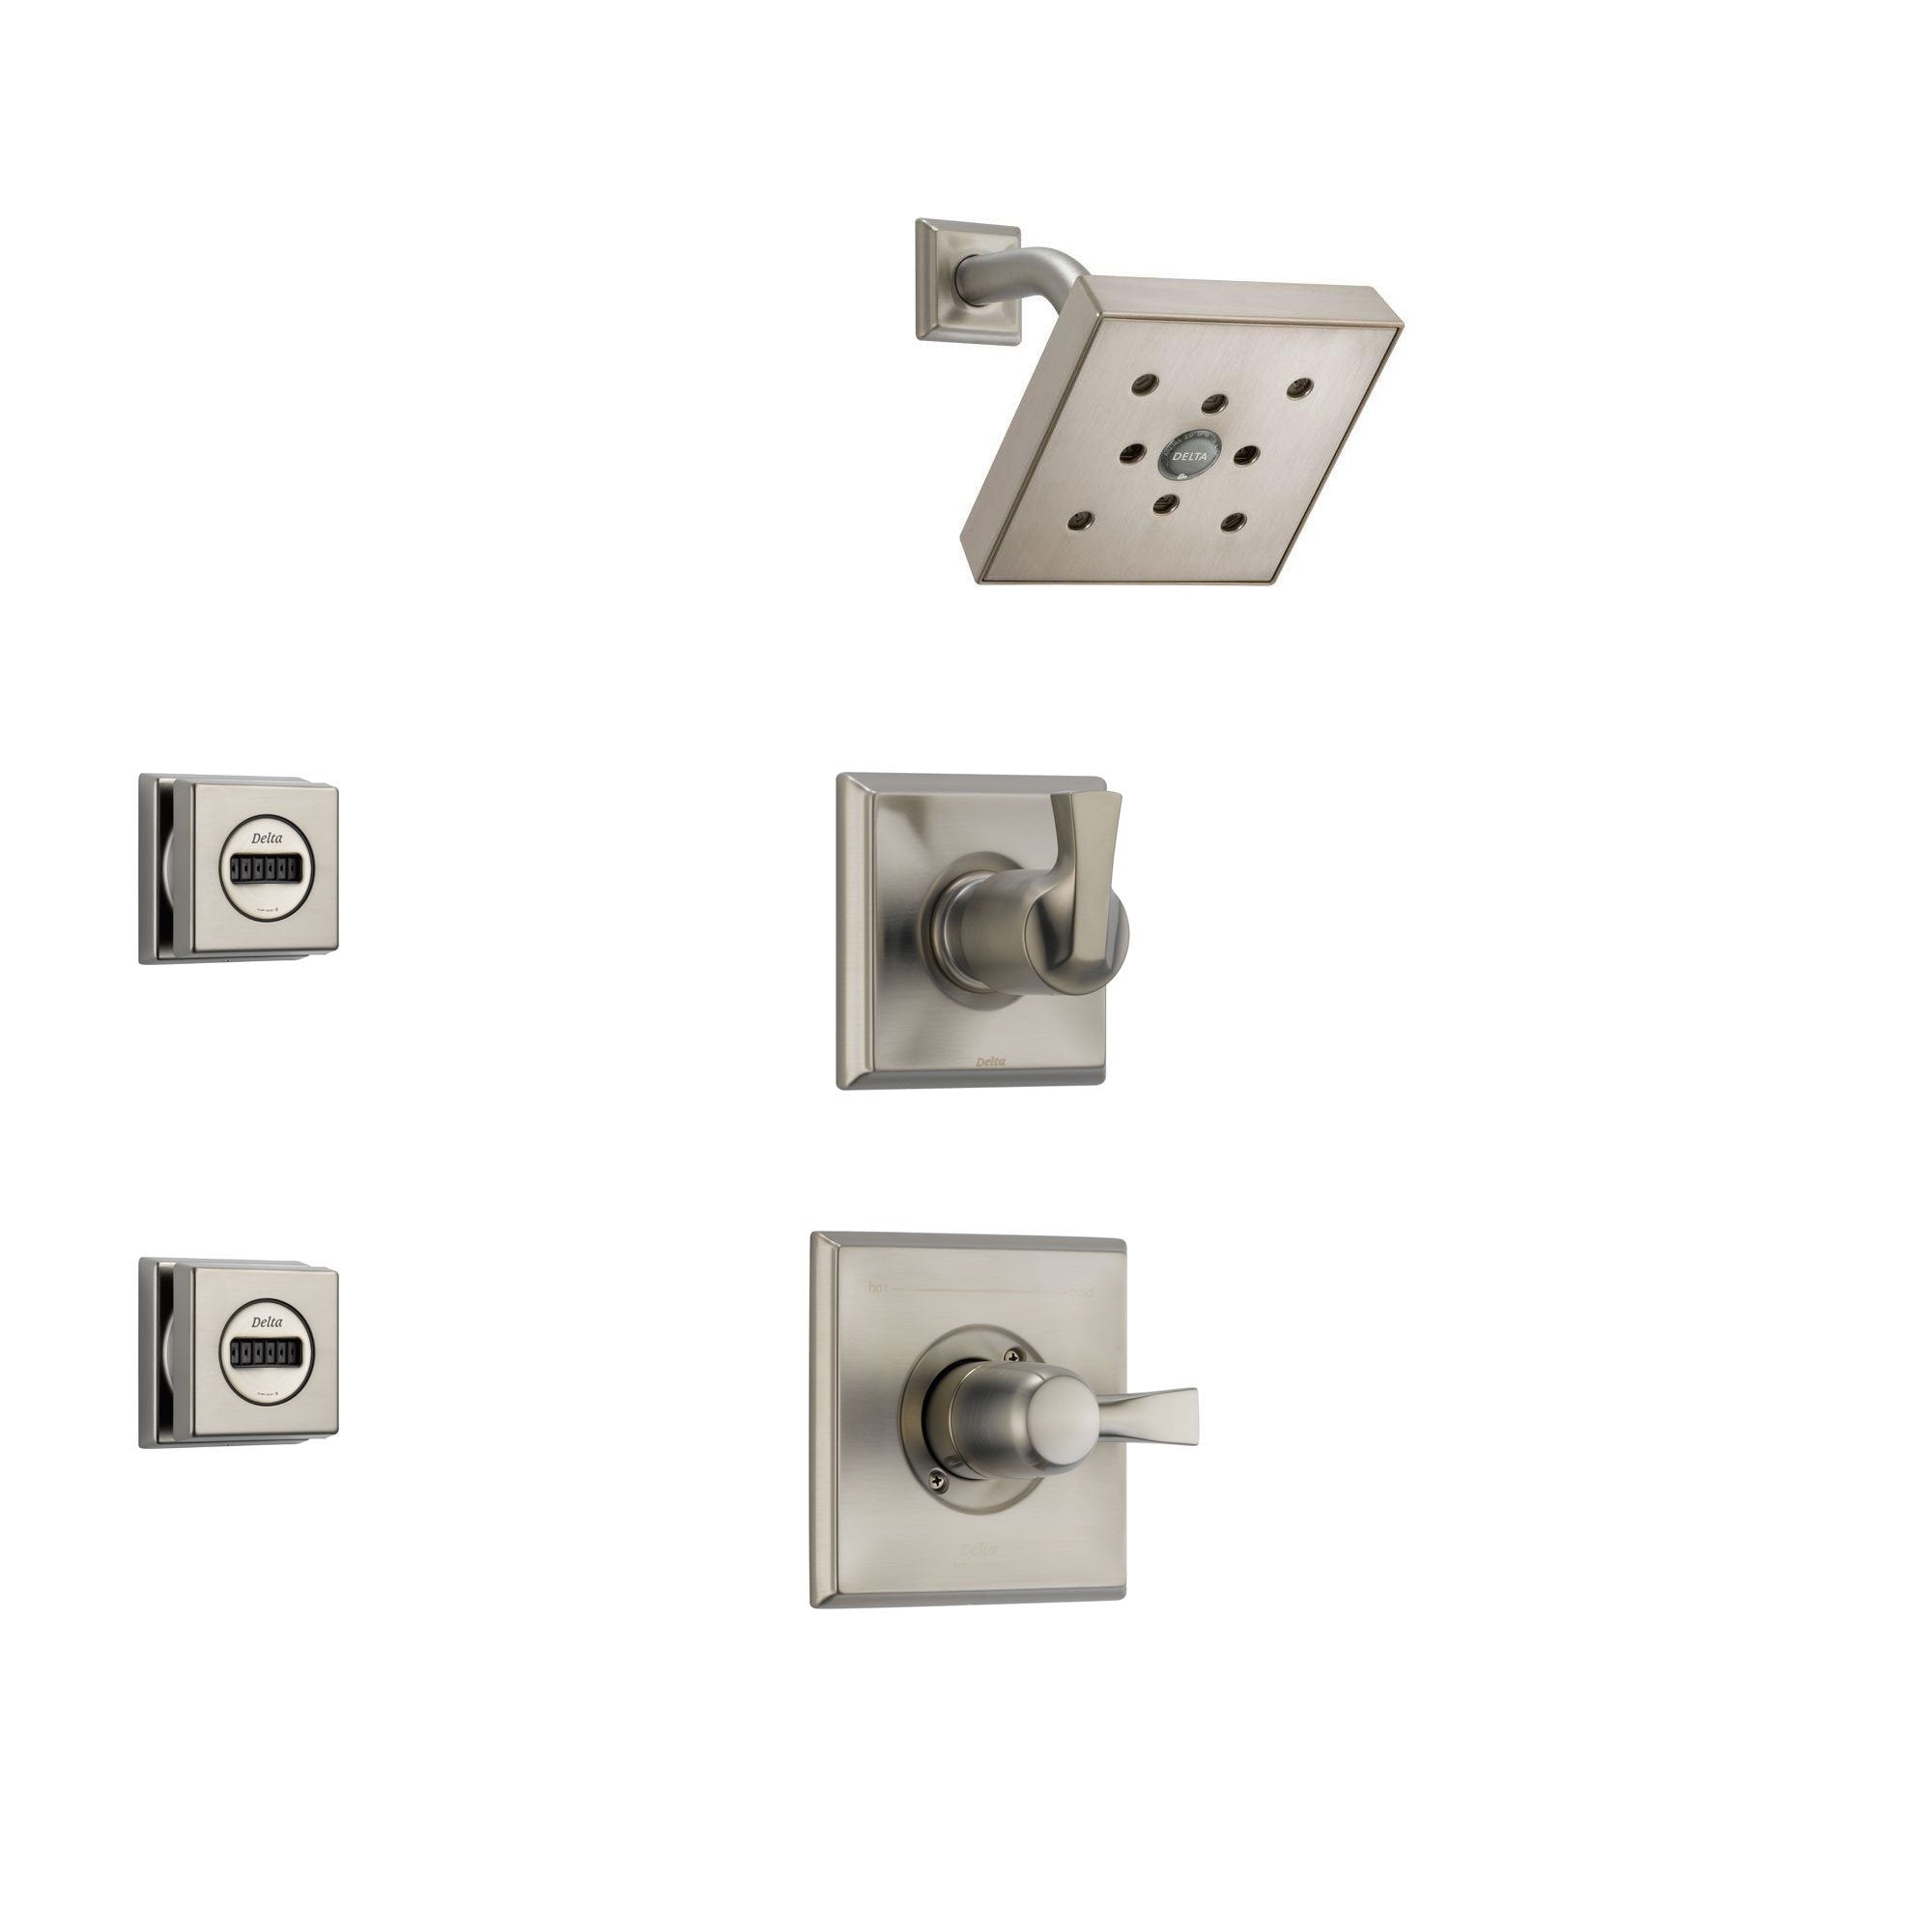 Delta Dryden Stainless Steel Shower System with Normal Shower Handle, 3-setting Diverter, Modern Square Showerhead, and 2 Body Sprays SS145185SS